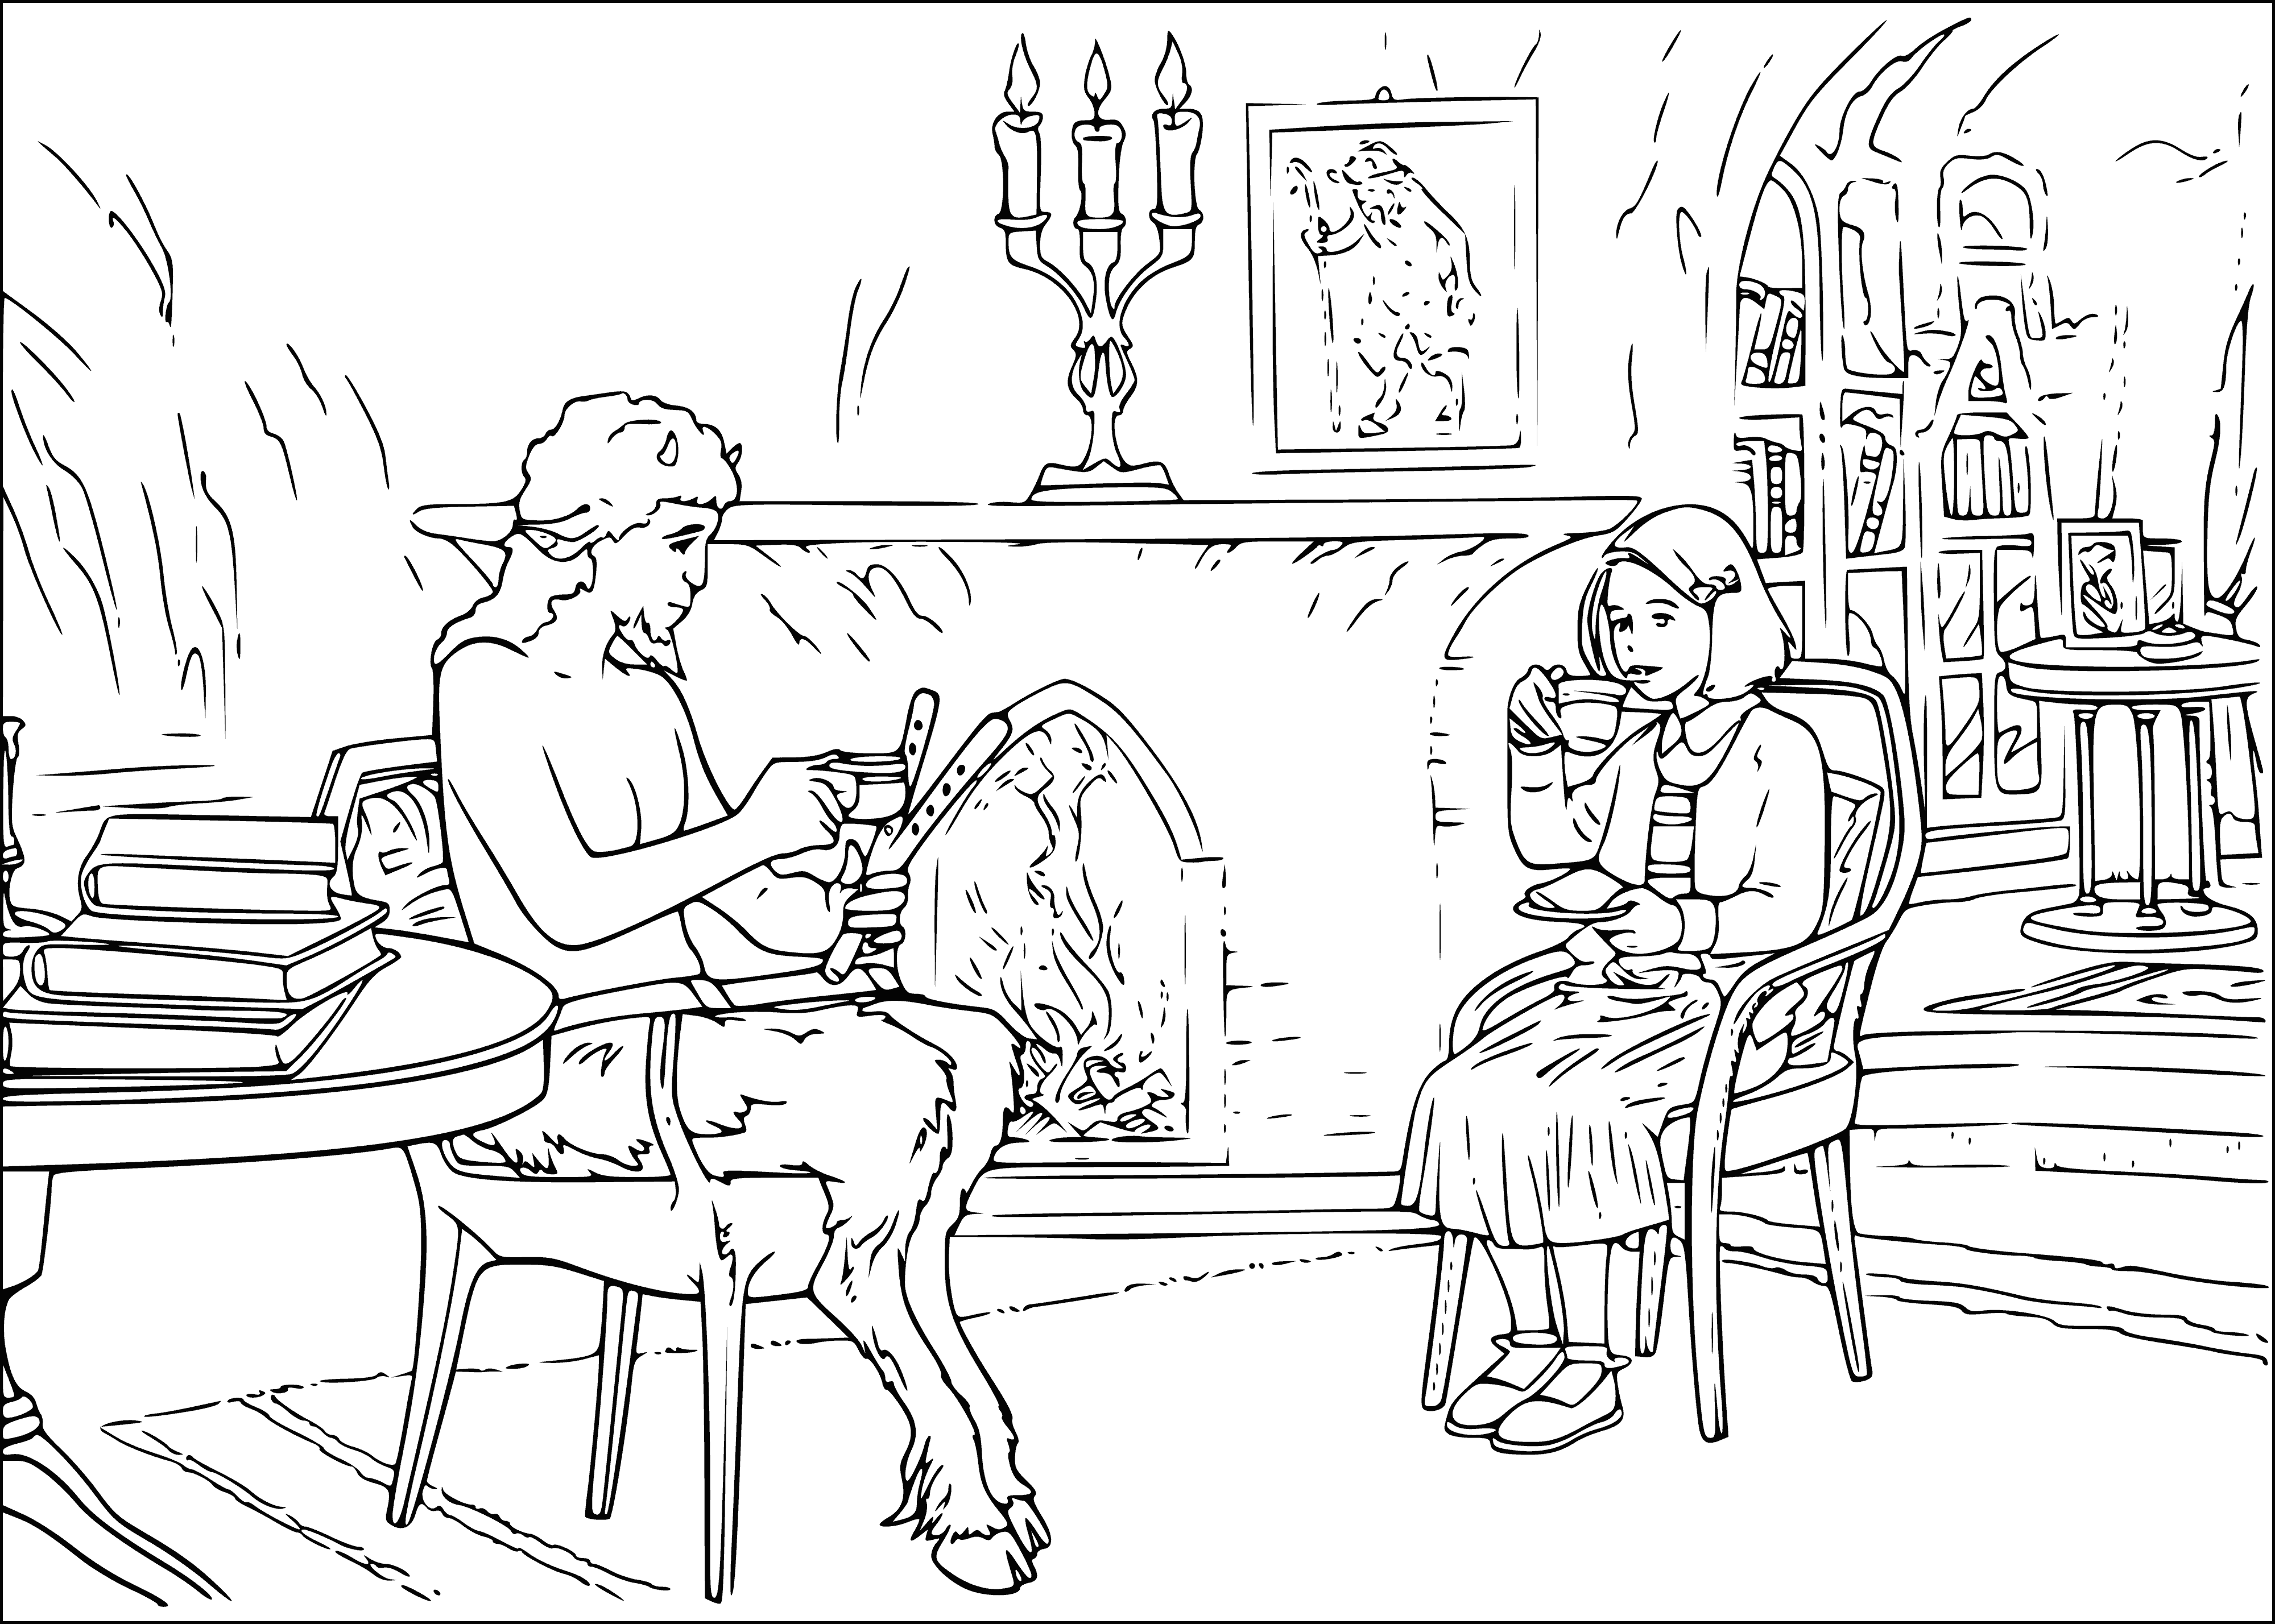 coloring page: Animals look in awe at a lion, witch and wardrobe. Witch holds staff, looking at the animals.